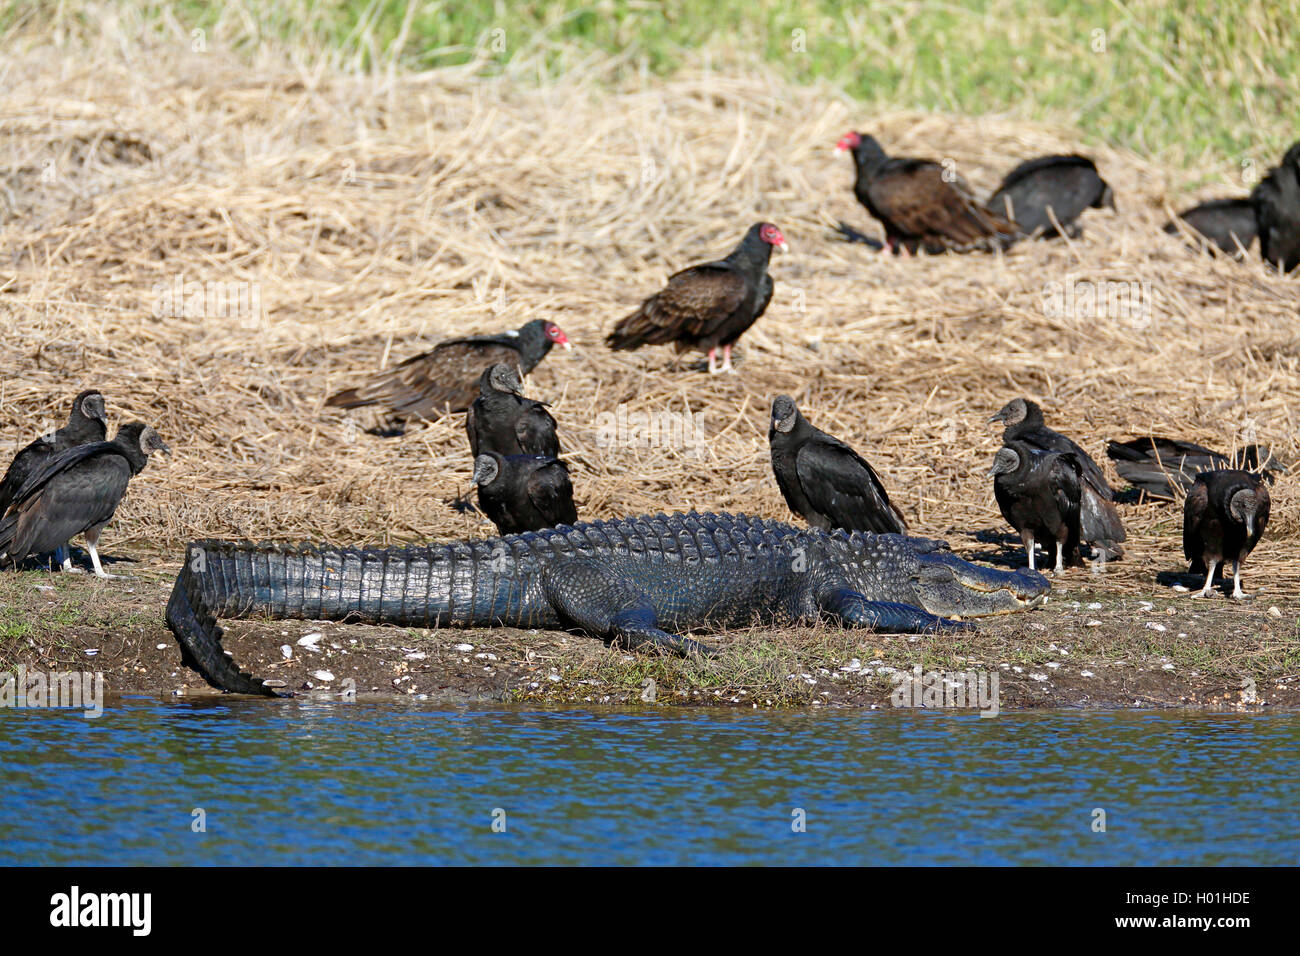 American alligator (Alligator mississippiensis), lies at the riverside, surrounded by black and turkey vultures, USA, Florida Stock Photo